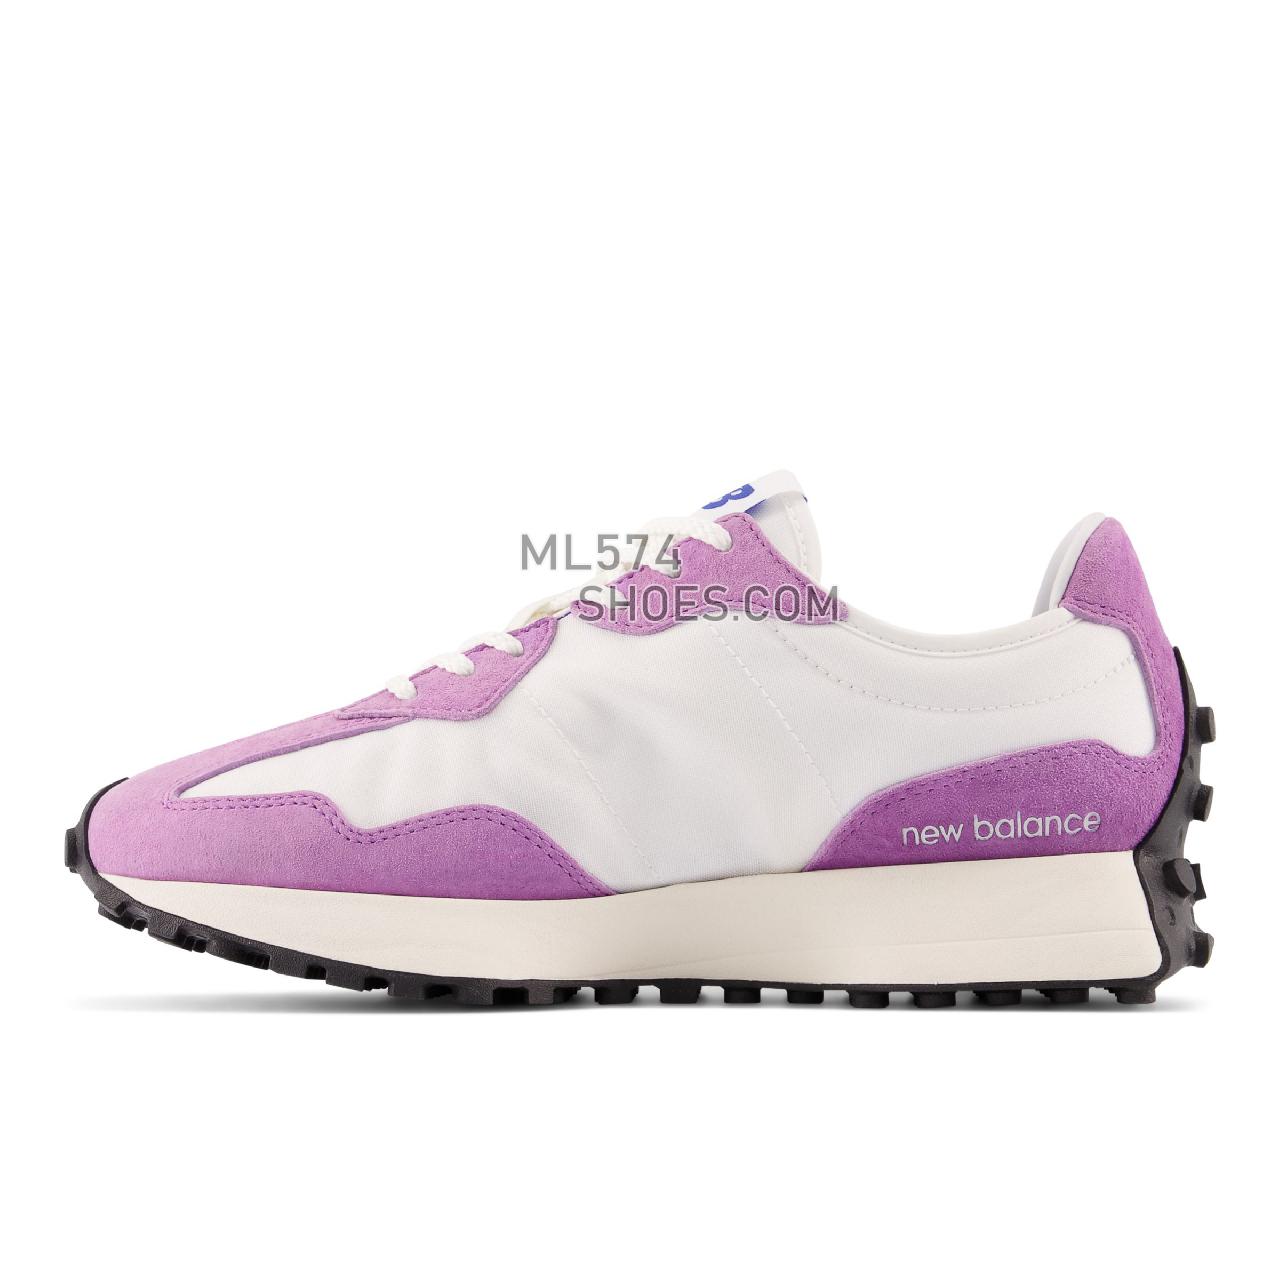 New Balance 327 - Women's Sport Style Sneakers - Deep Violet with Heliotrope - WS327LK1